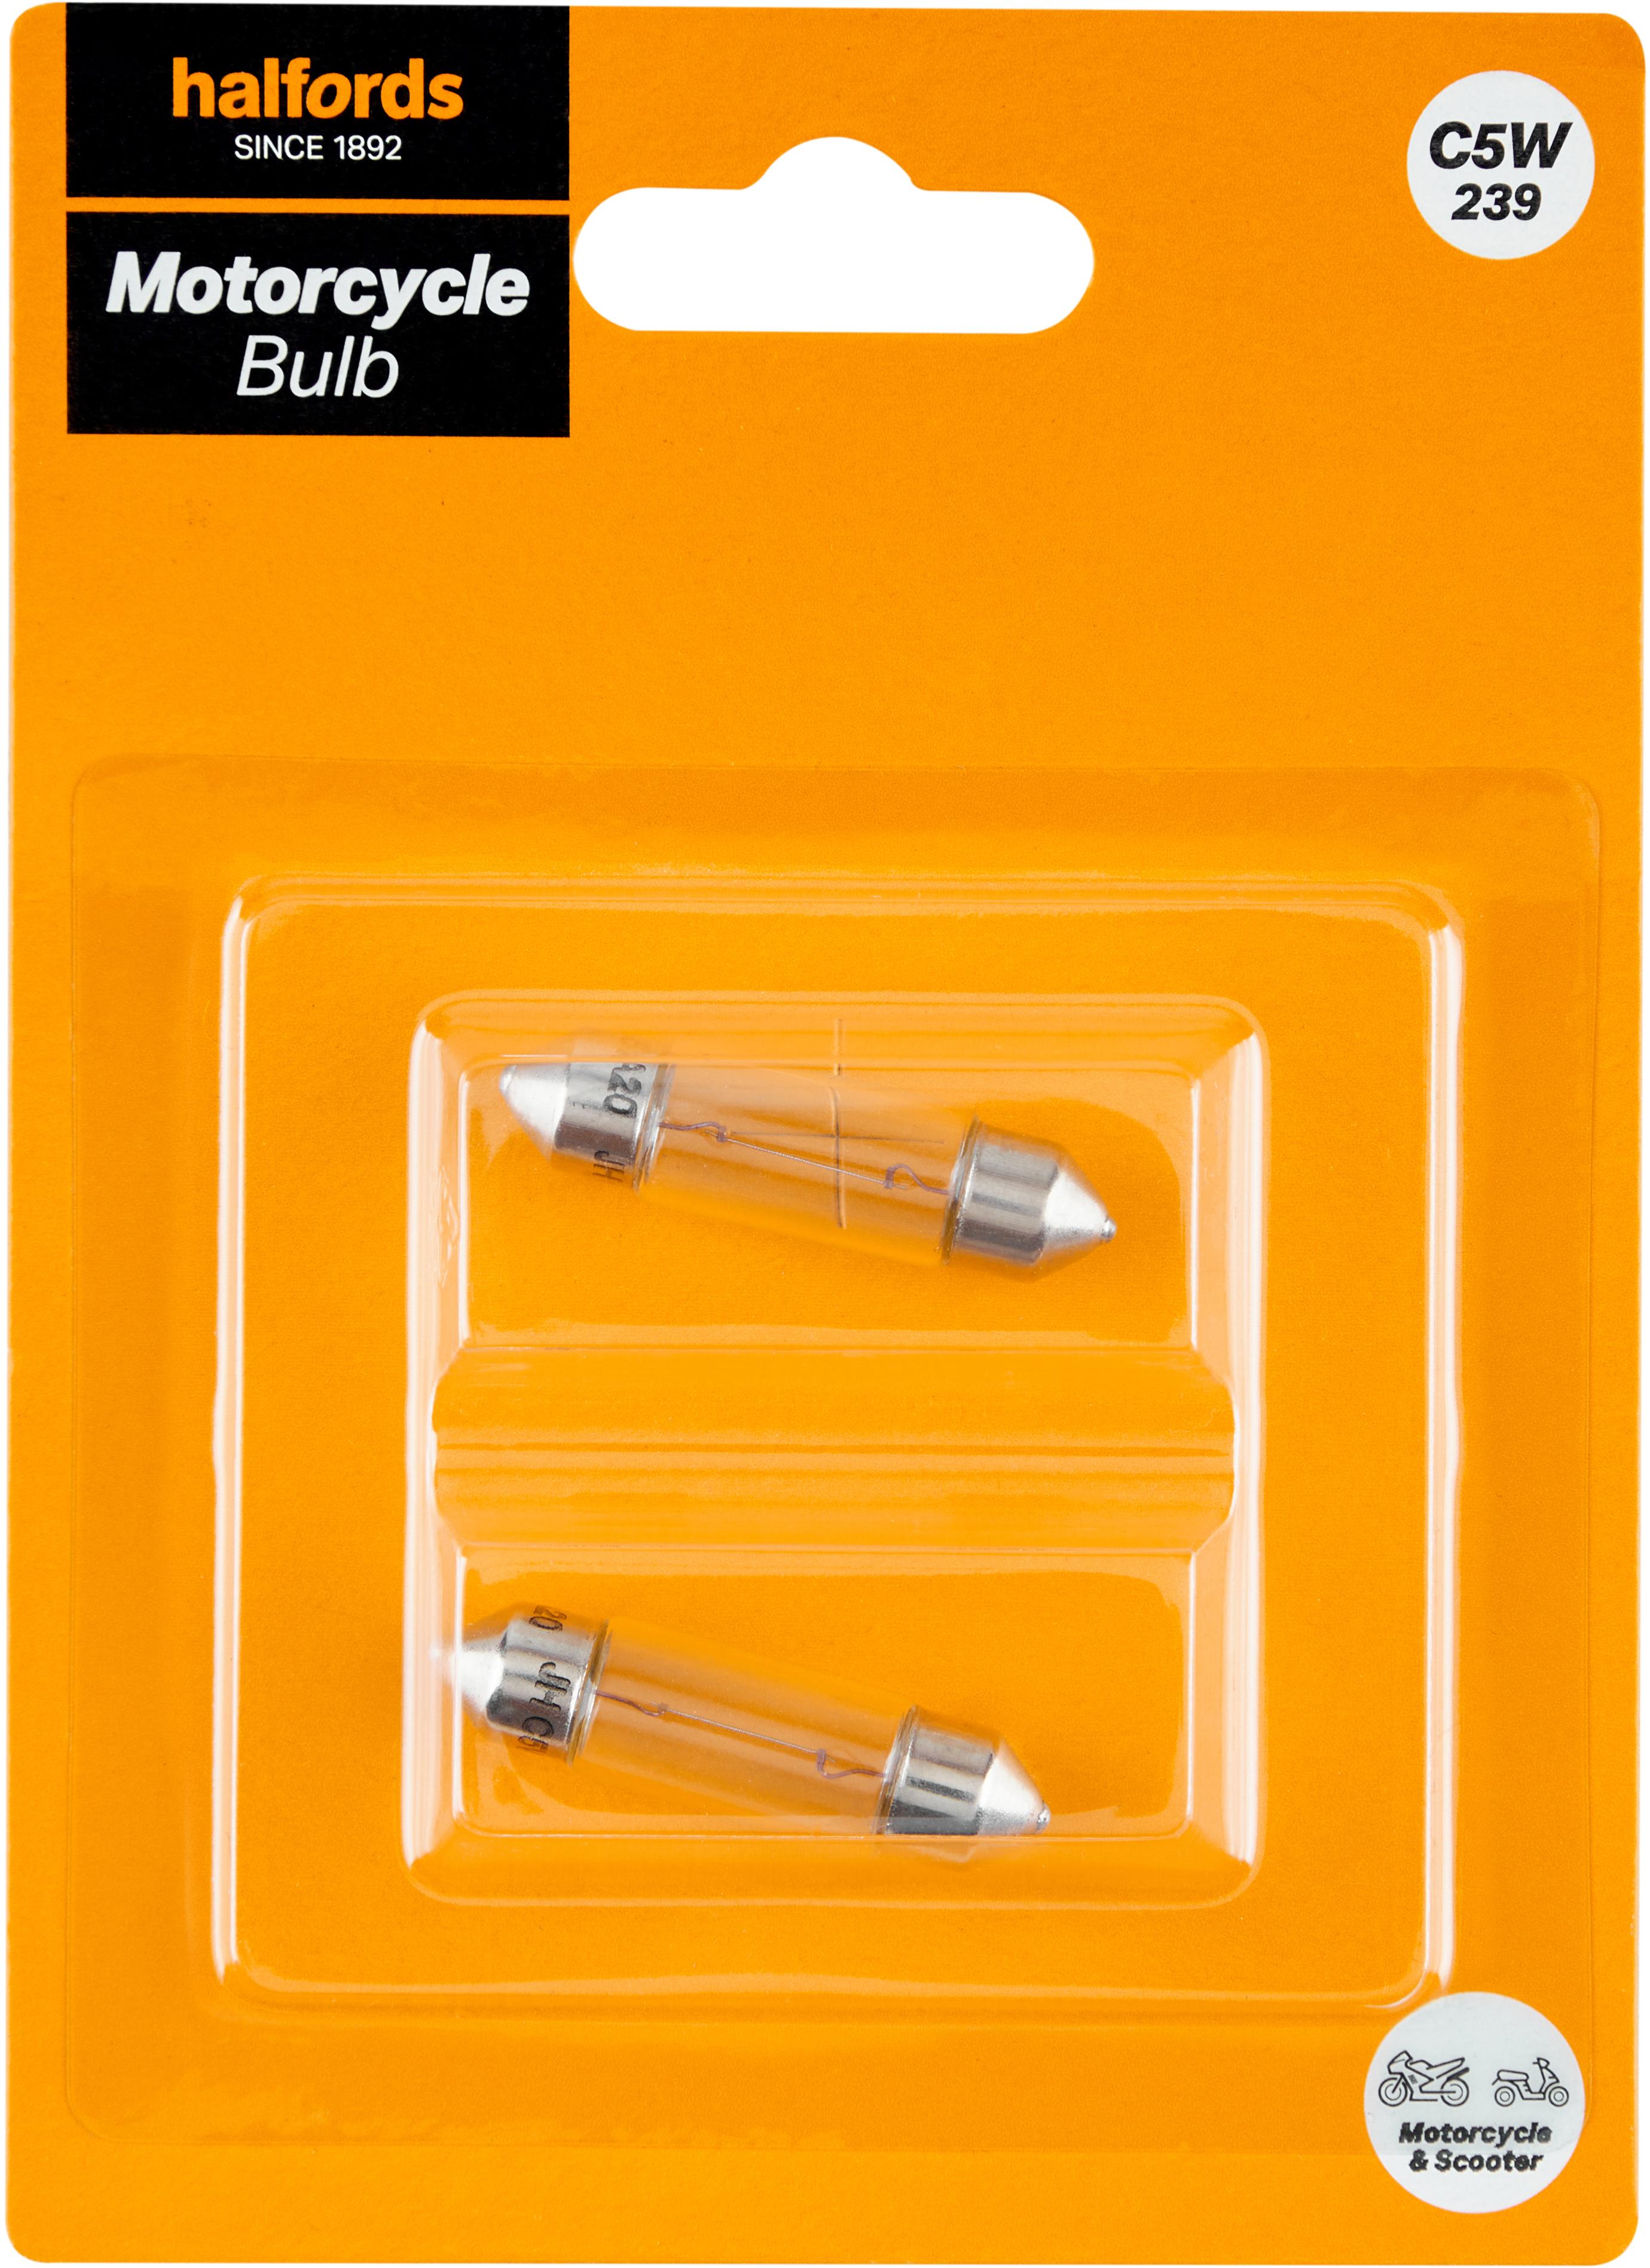 Halfords Core Motorcycle Bulb C5W 239